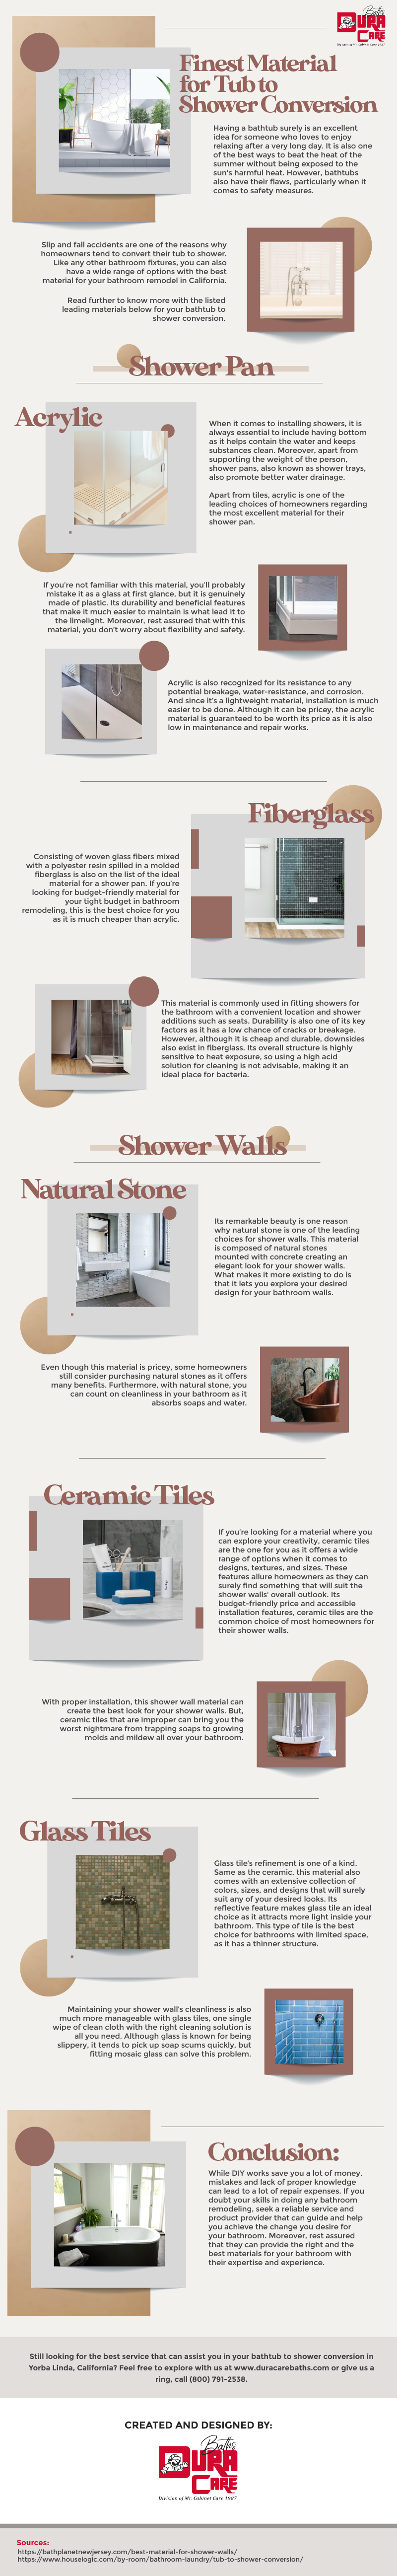 Finest Material for Tub to Shower Conversion-01 infographic